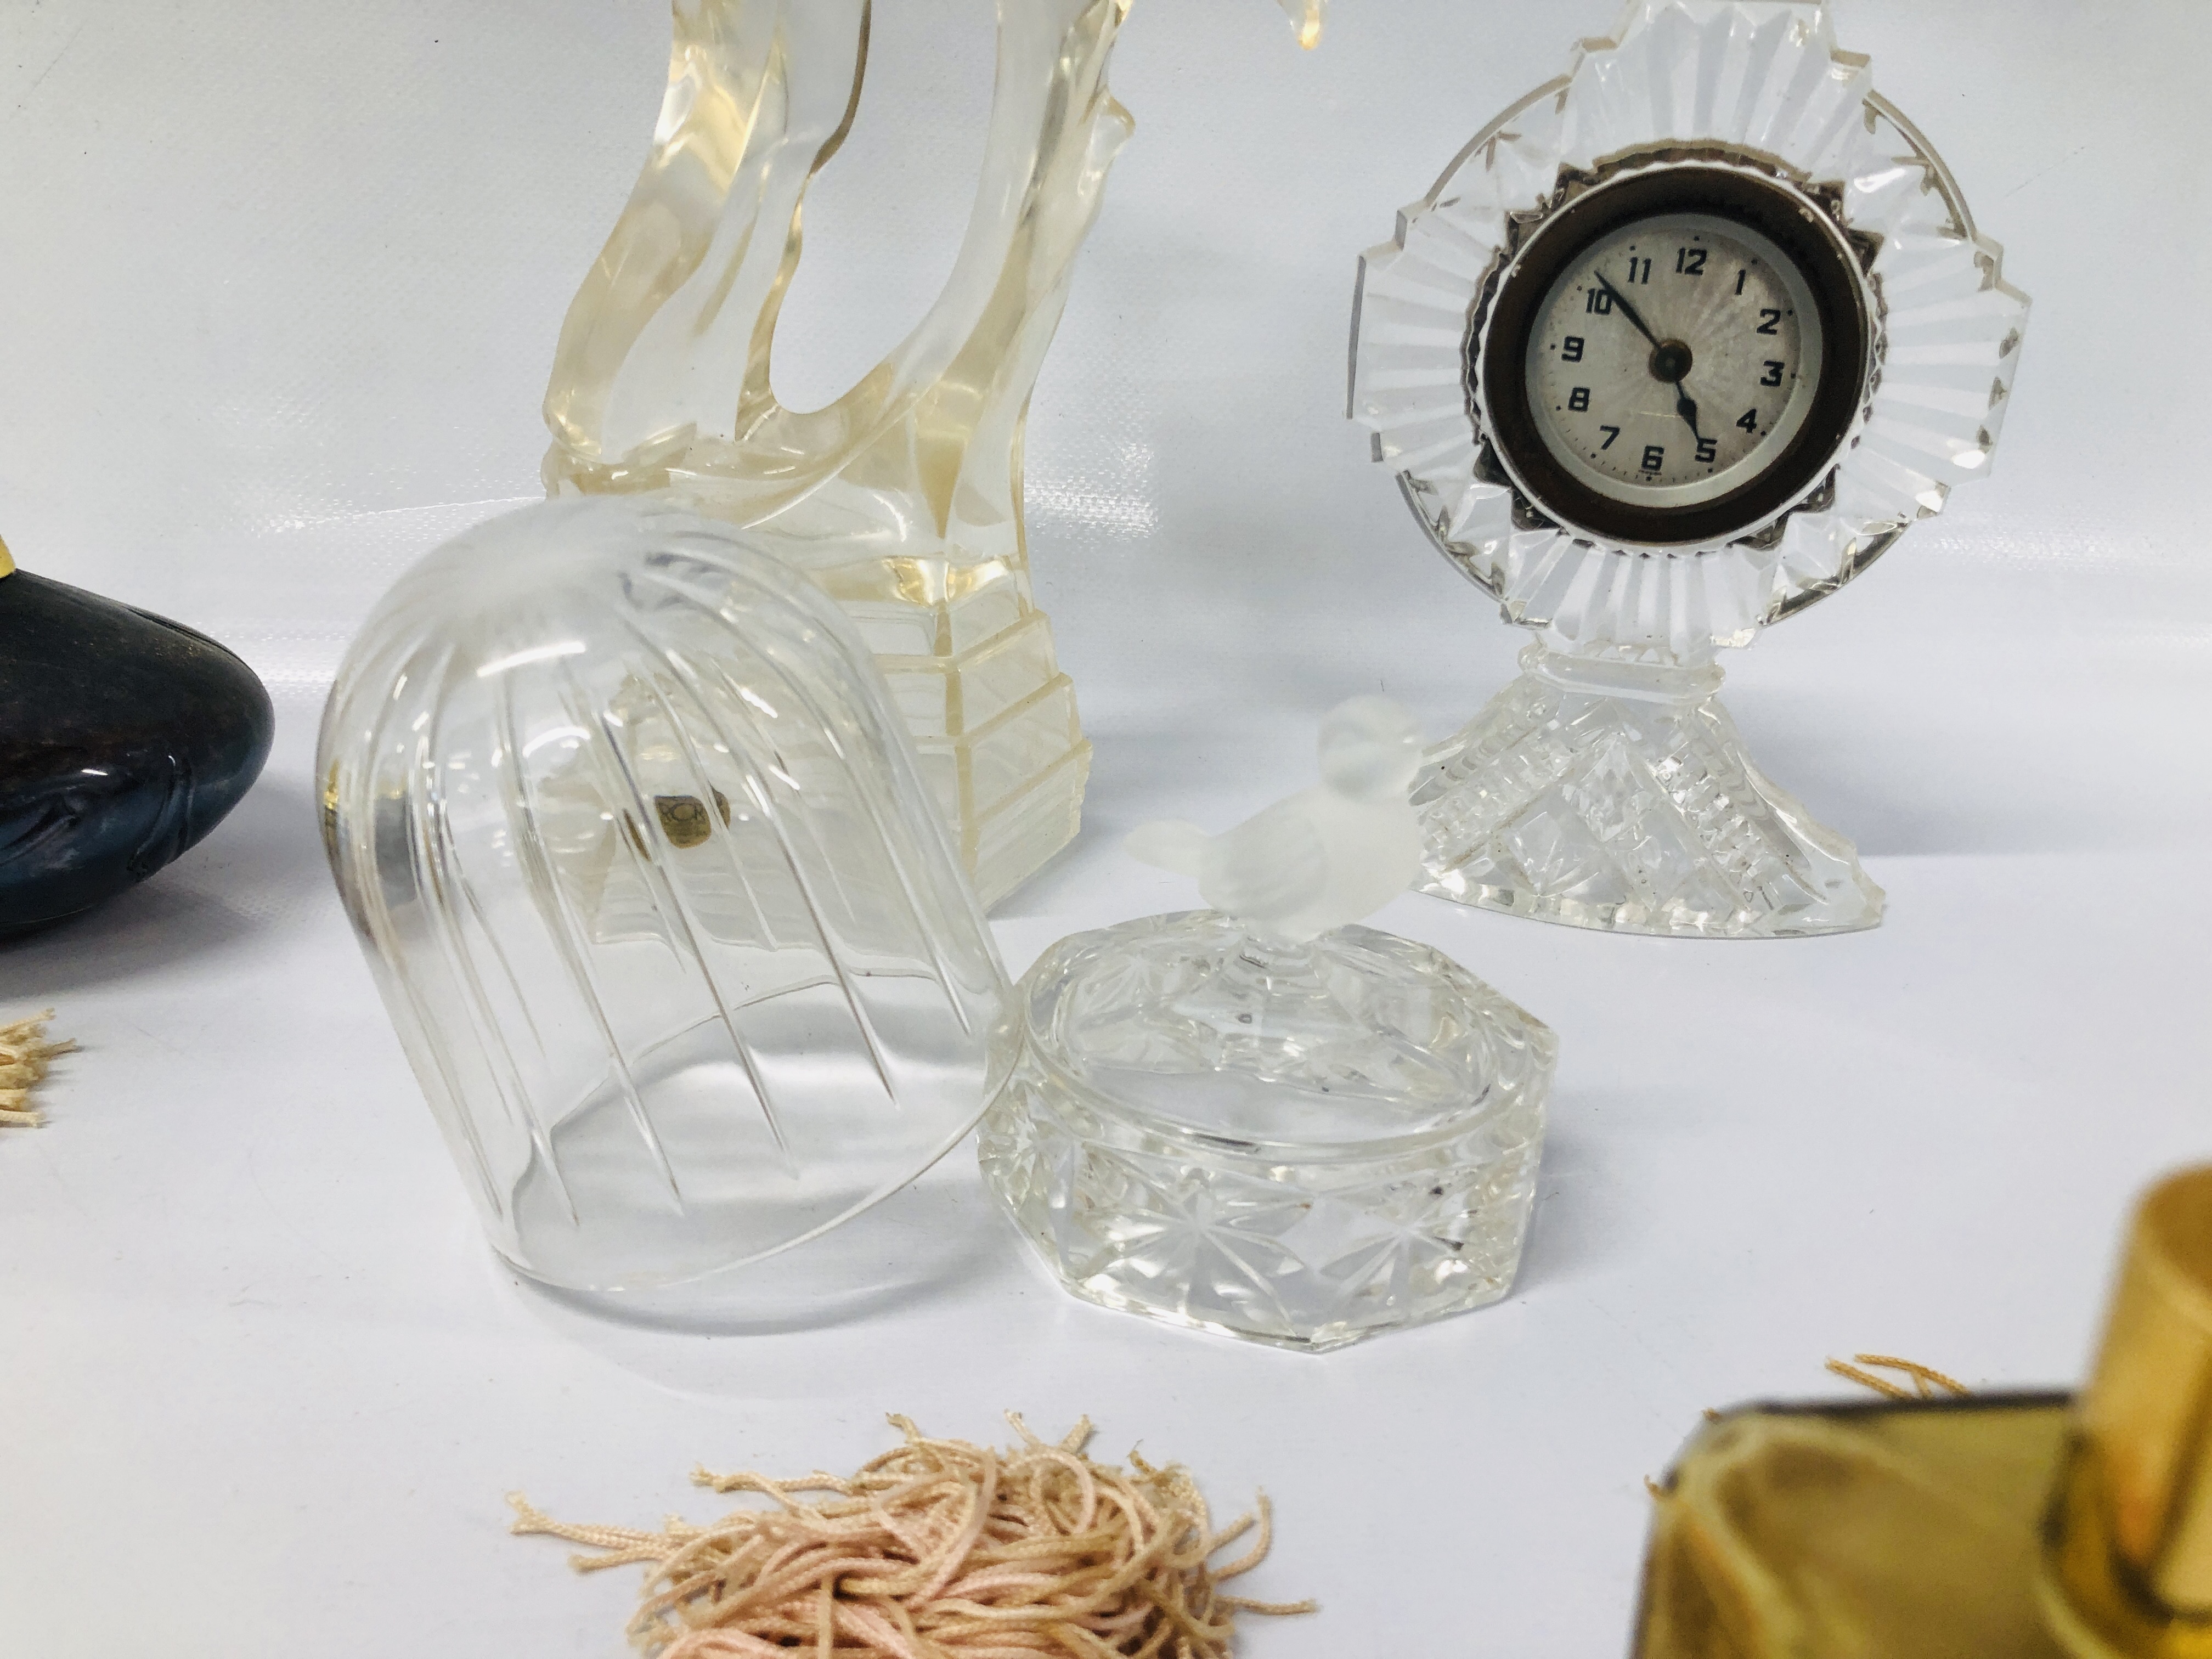 6 X ASSORTED PERFUME BOTTLES, RCR CRYSTAL DANCING GROUP, VINTAGE GLASS DRESSING TABLE CLOCK, ETC. - Image 8 of 12